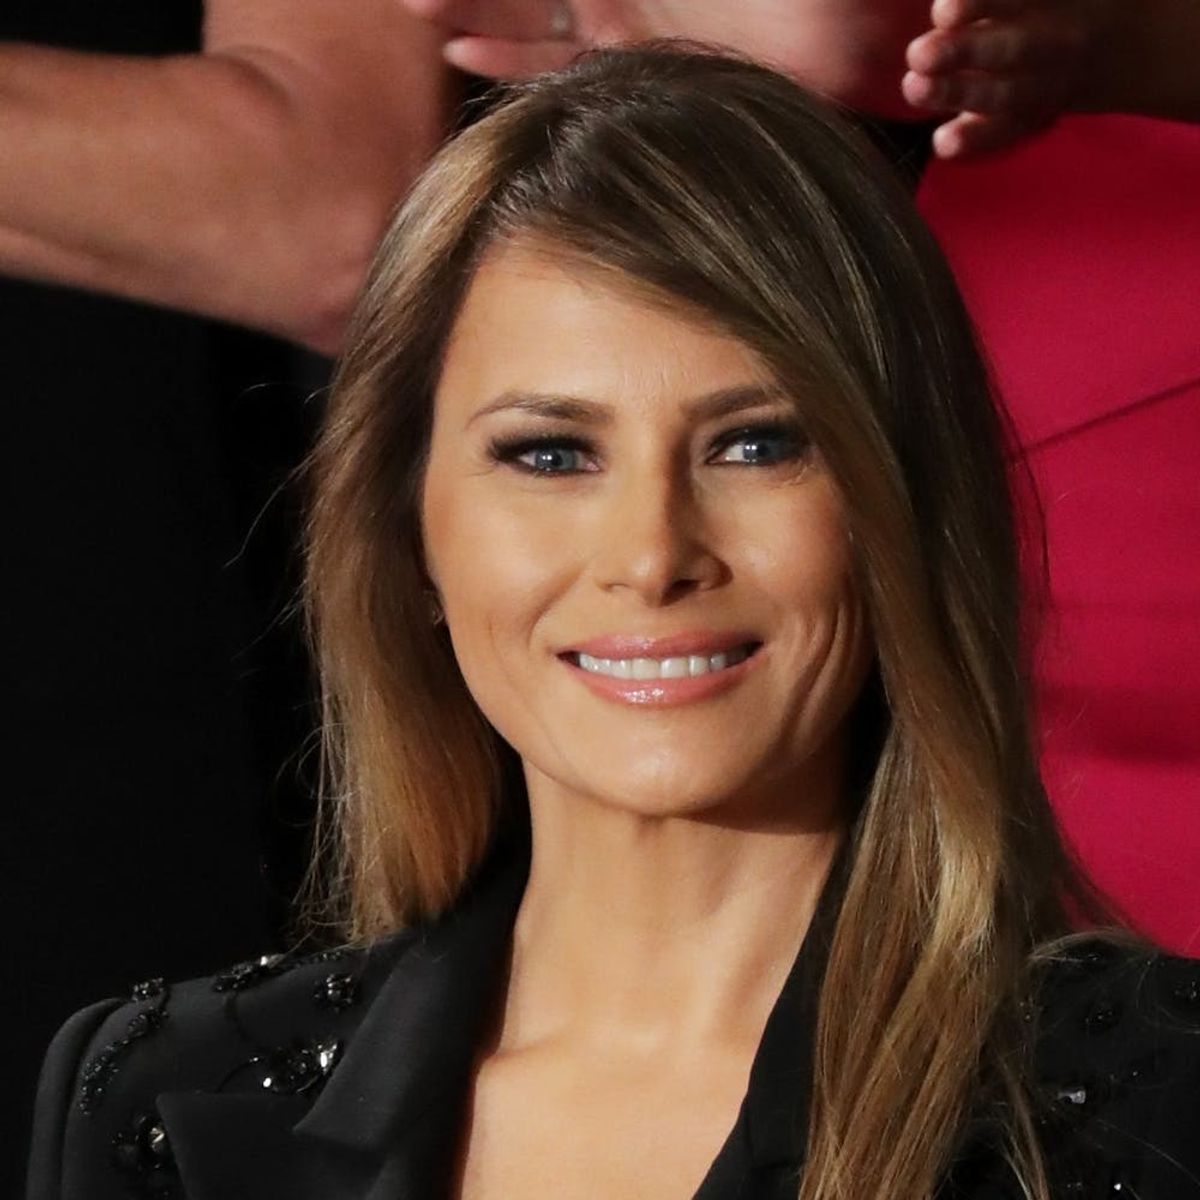 Michael Kors States Melania Trump’s Outfit at Congress Was Purchased off the Rack